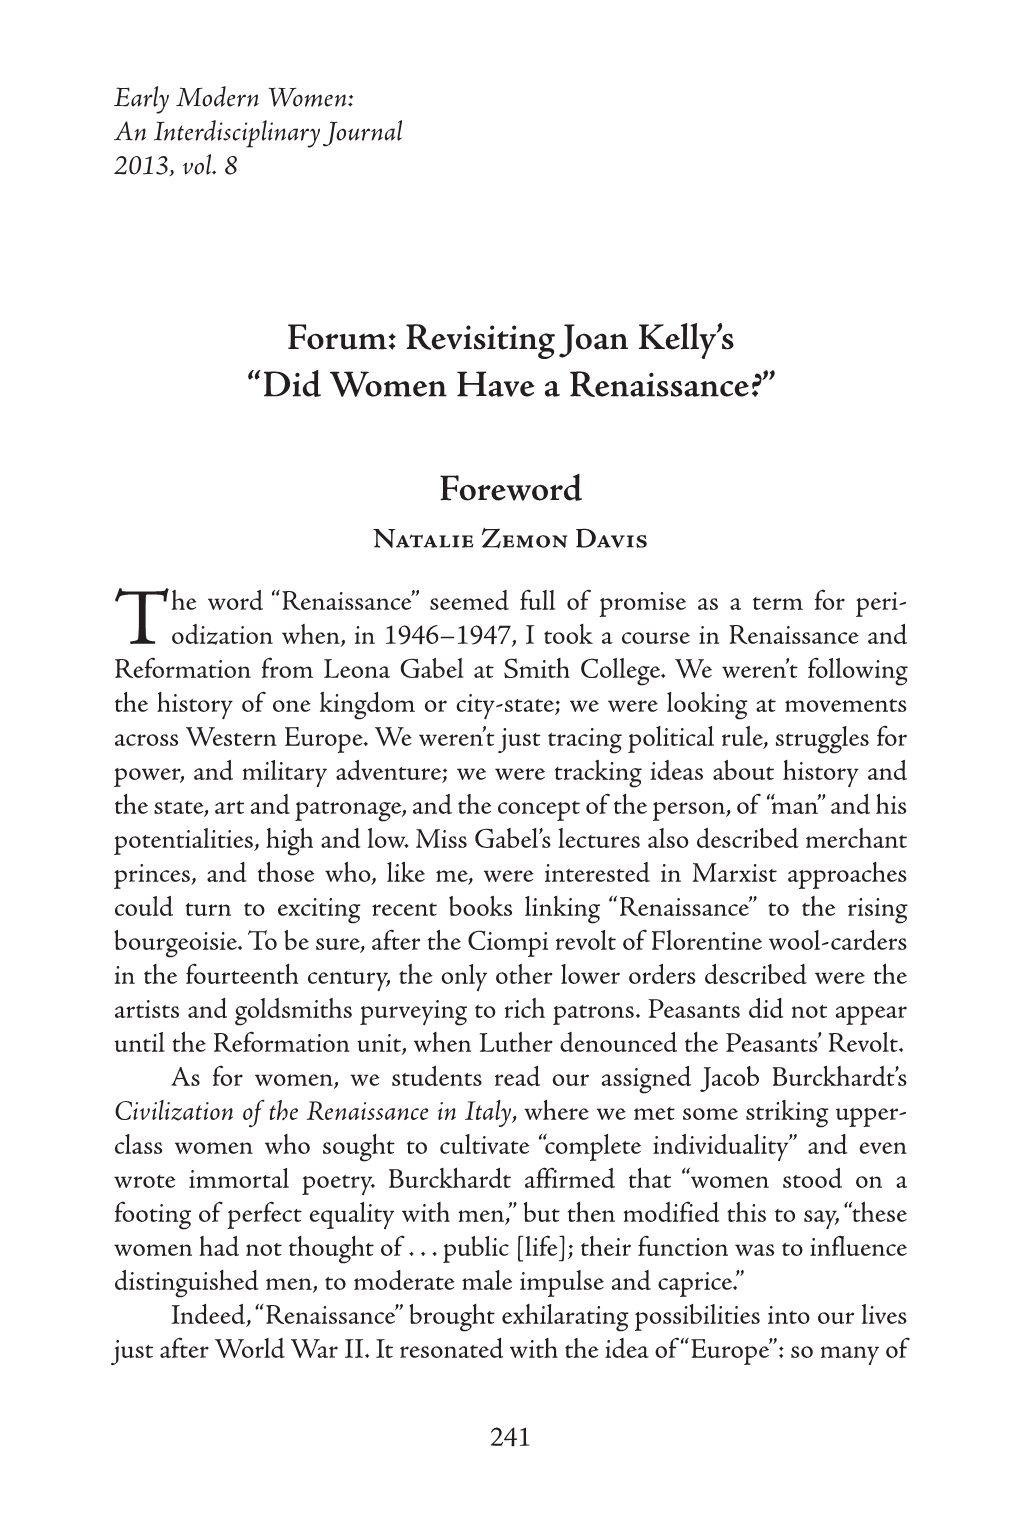 Revisiting Joan Kelly's “Did Women Have a Renaissance?” Foreword